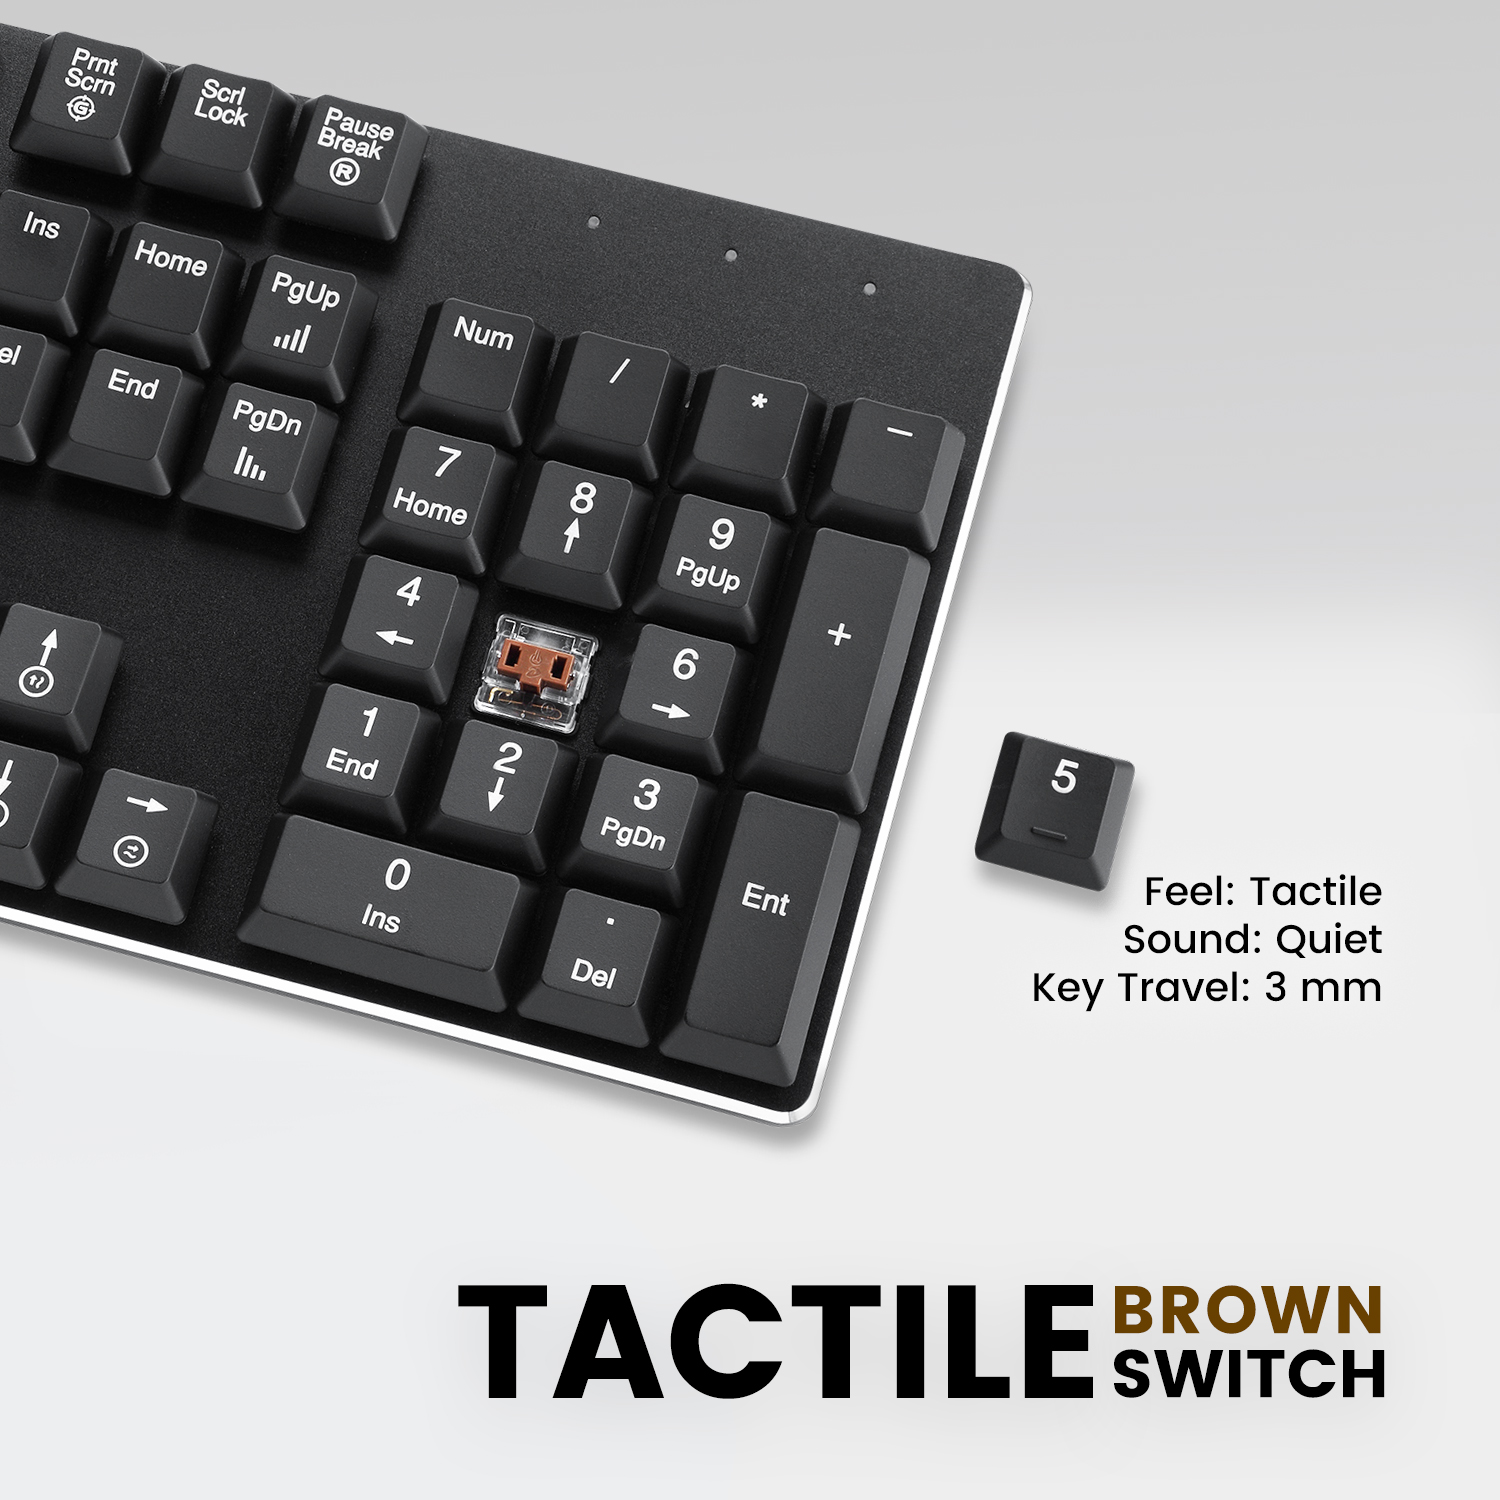  TACTILE BROWN SWITCH 